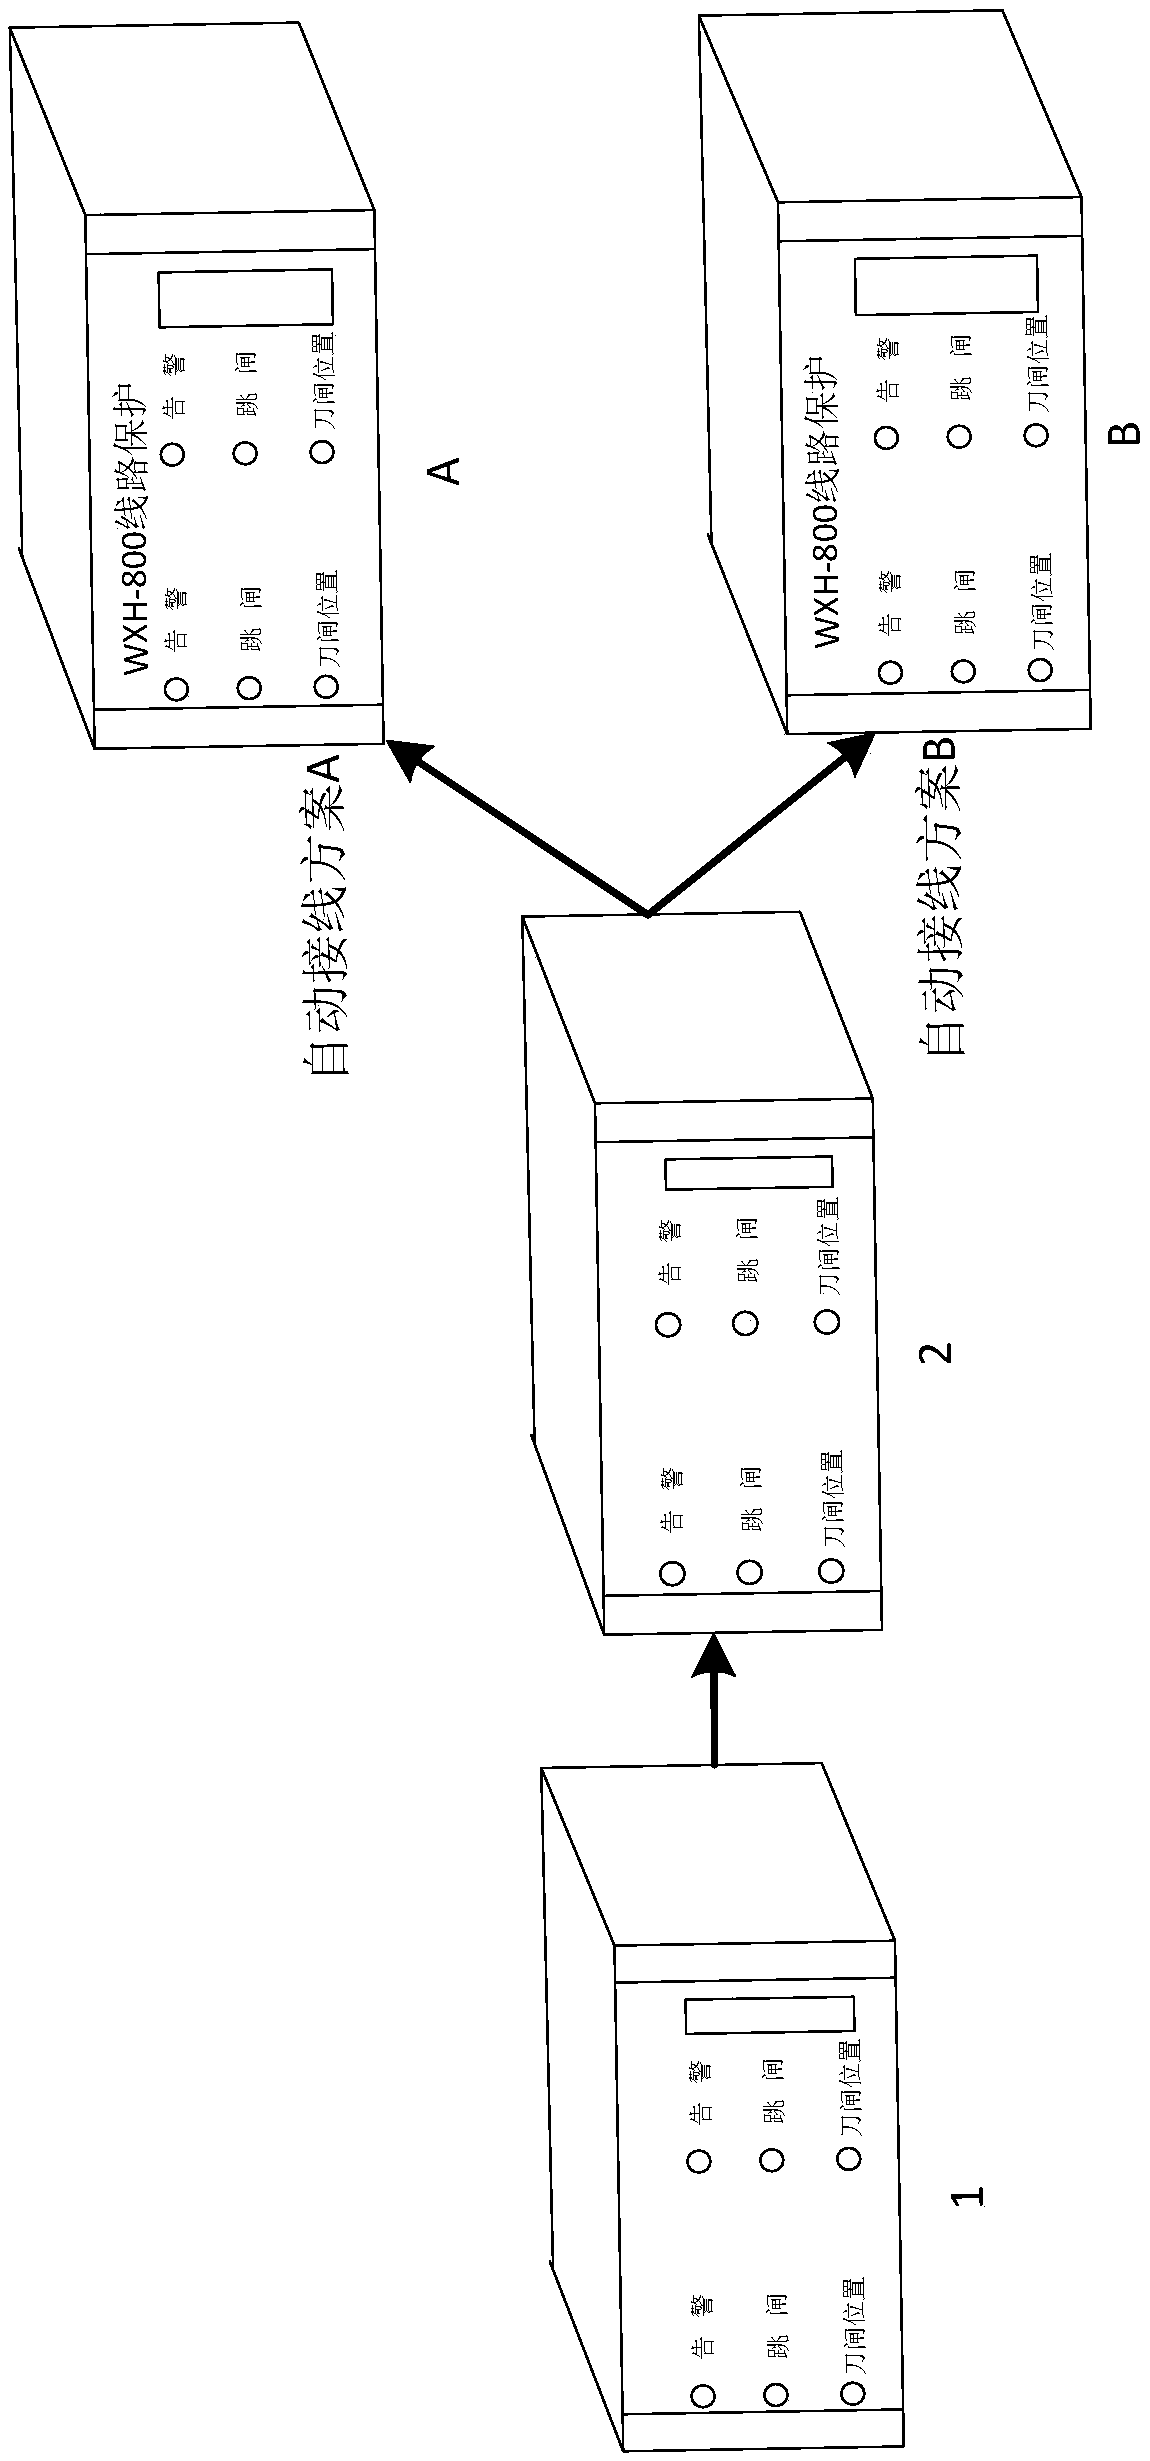 Automatic programmable wiring device for protecting simulation test